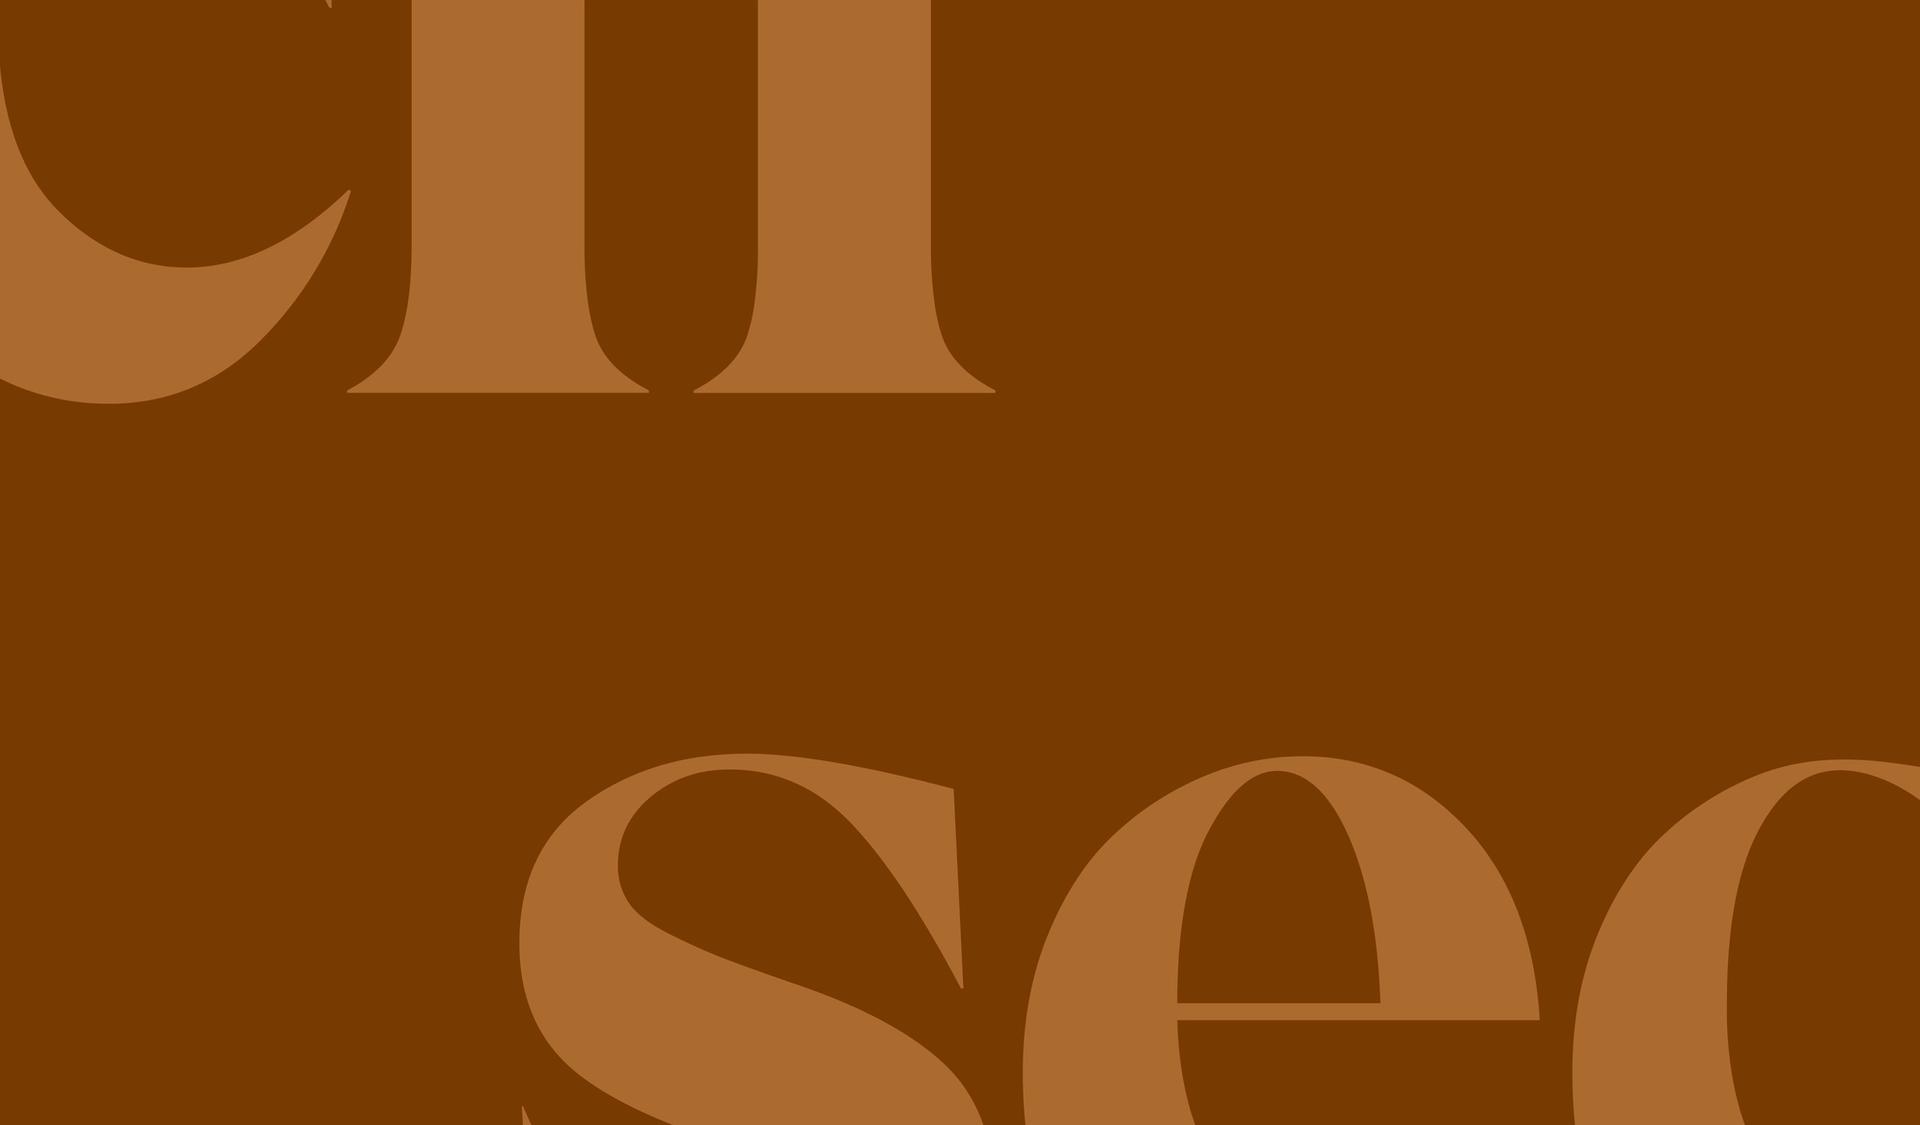 Secfi logo with brown background